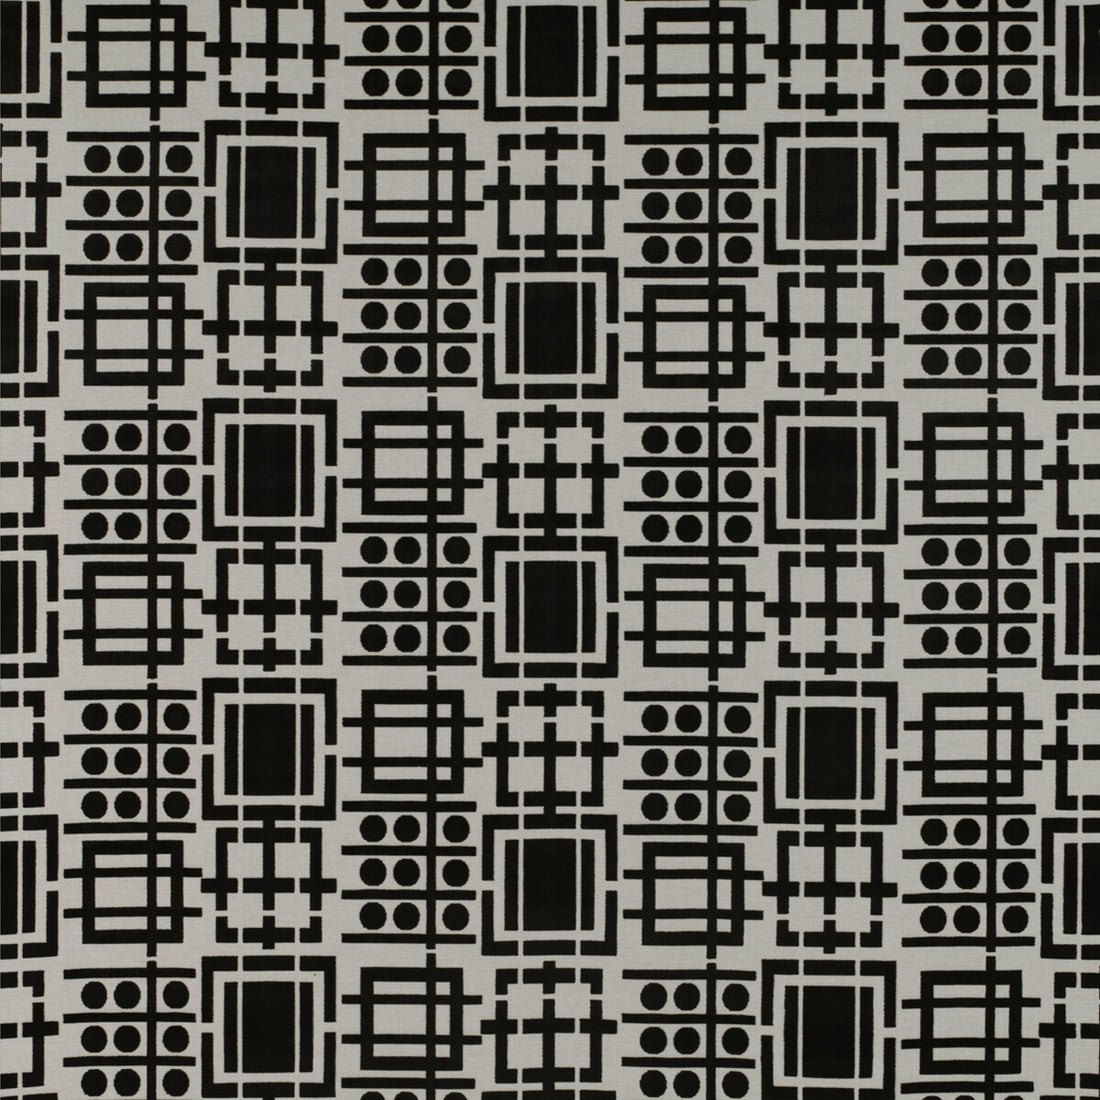 Prato fabric in blanco/onyx color - pattern GDT5349.001.0 - by Gaston y Daniela in the Tierras collection